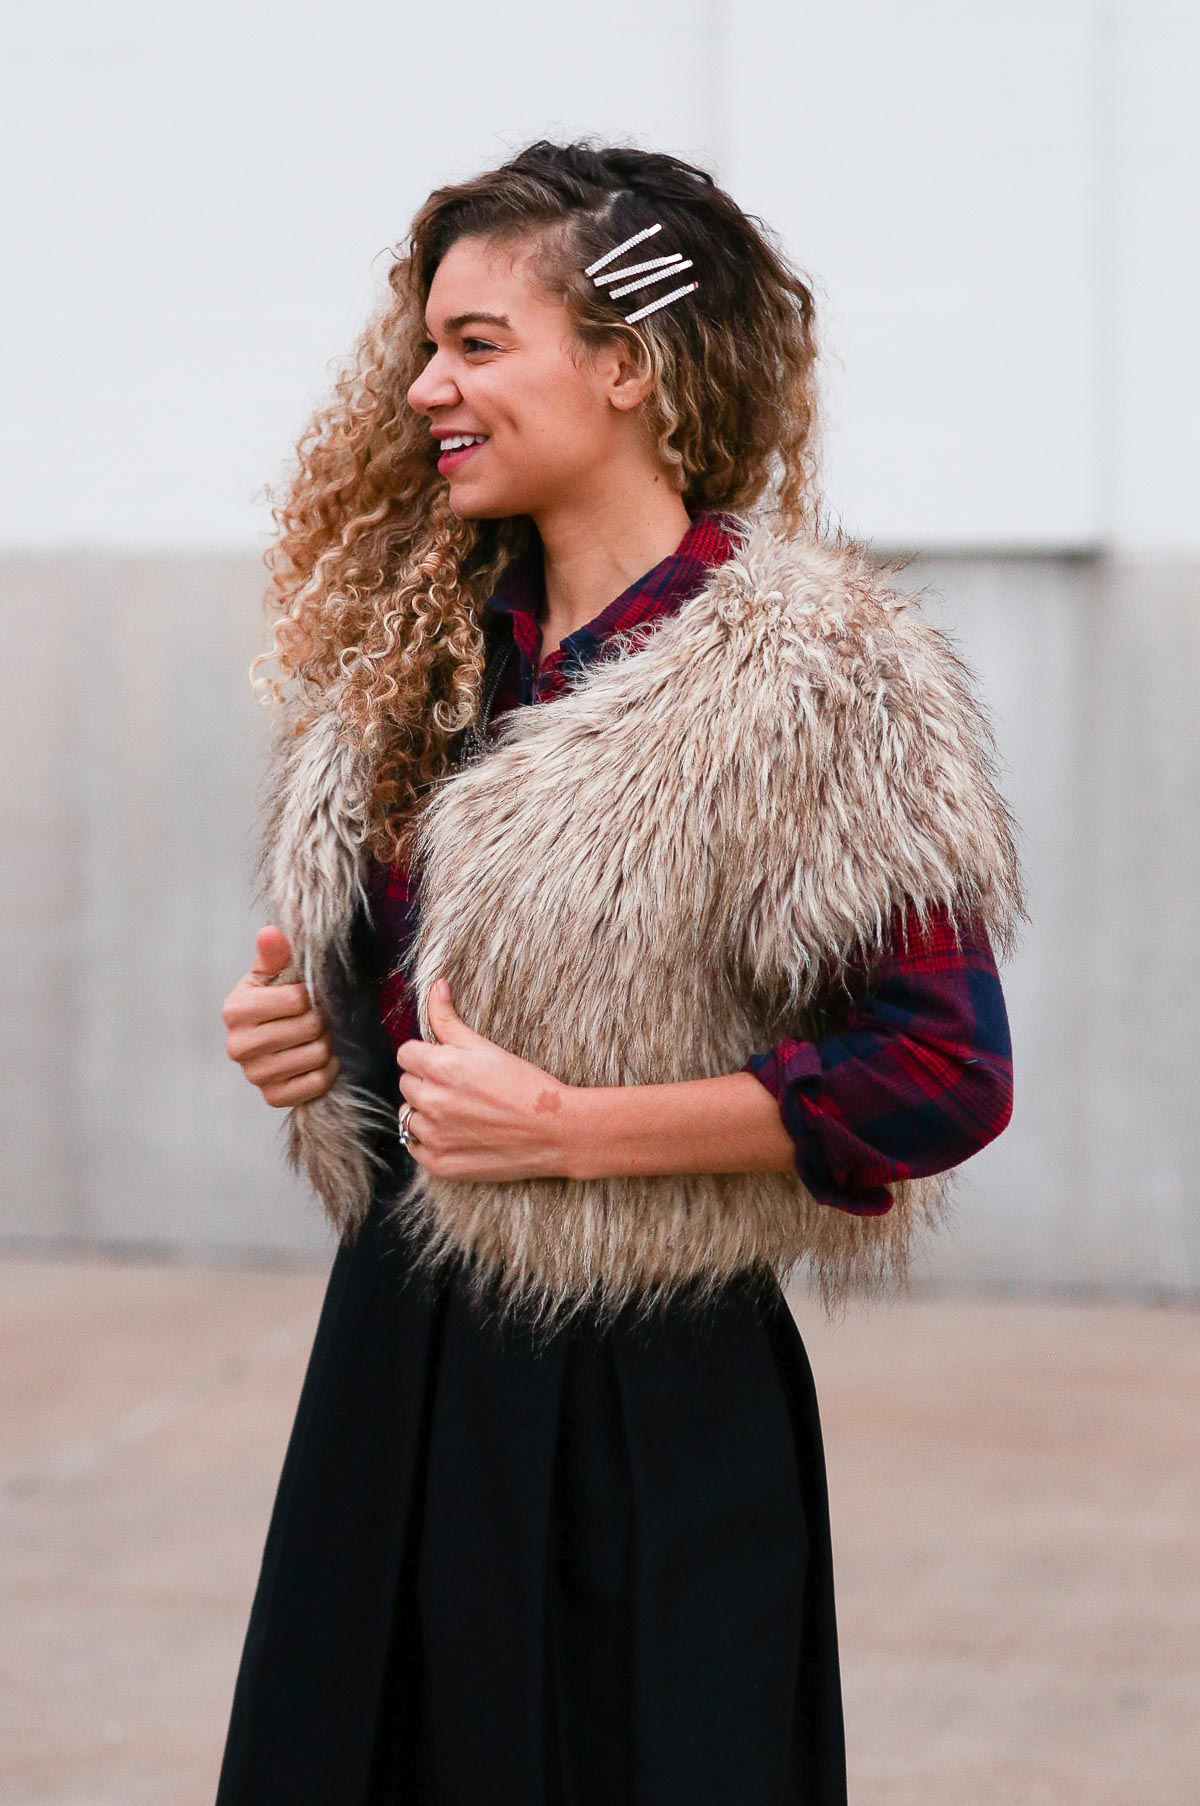 holiday outfits featuring a high waist skirt, plaid shirt, and faux fur